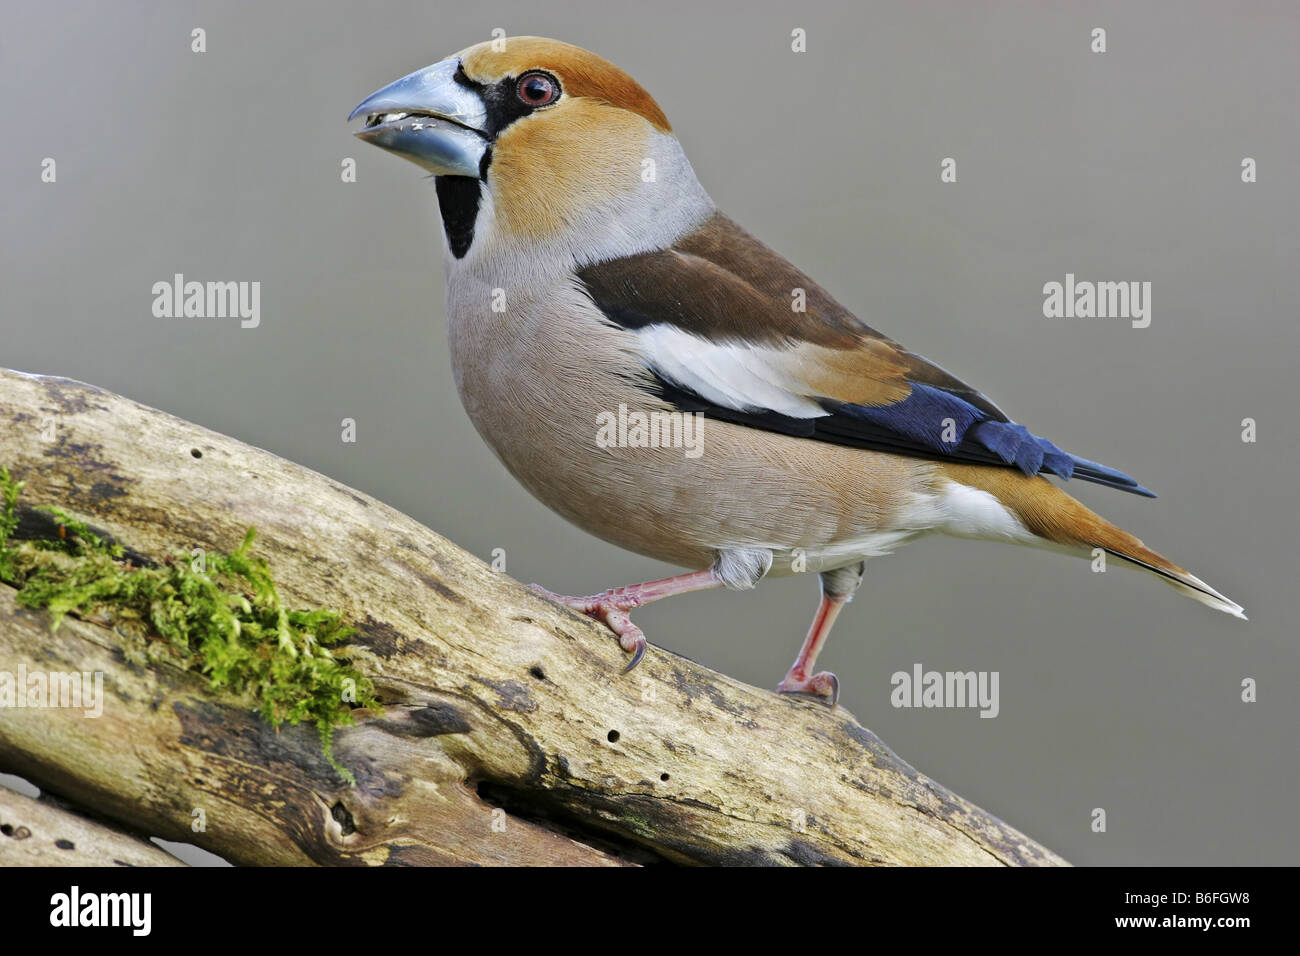 hawfinch (Coccothraustes coccothraustes), sitting on a branch, Germany Stock Photo